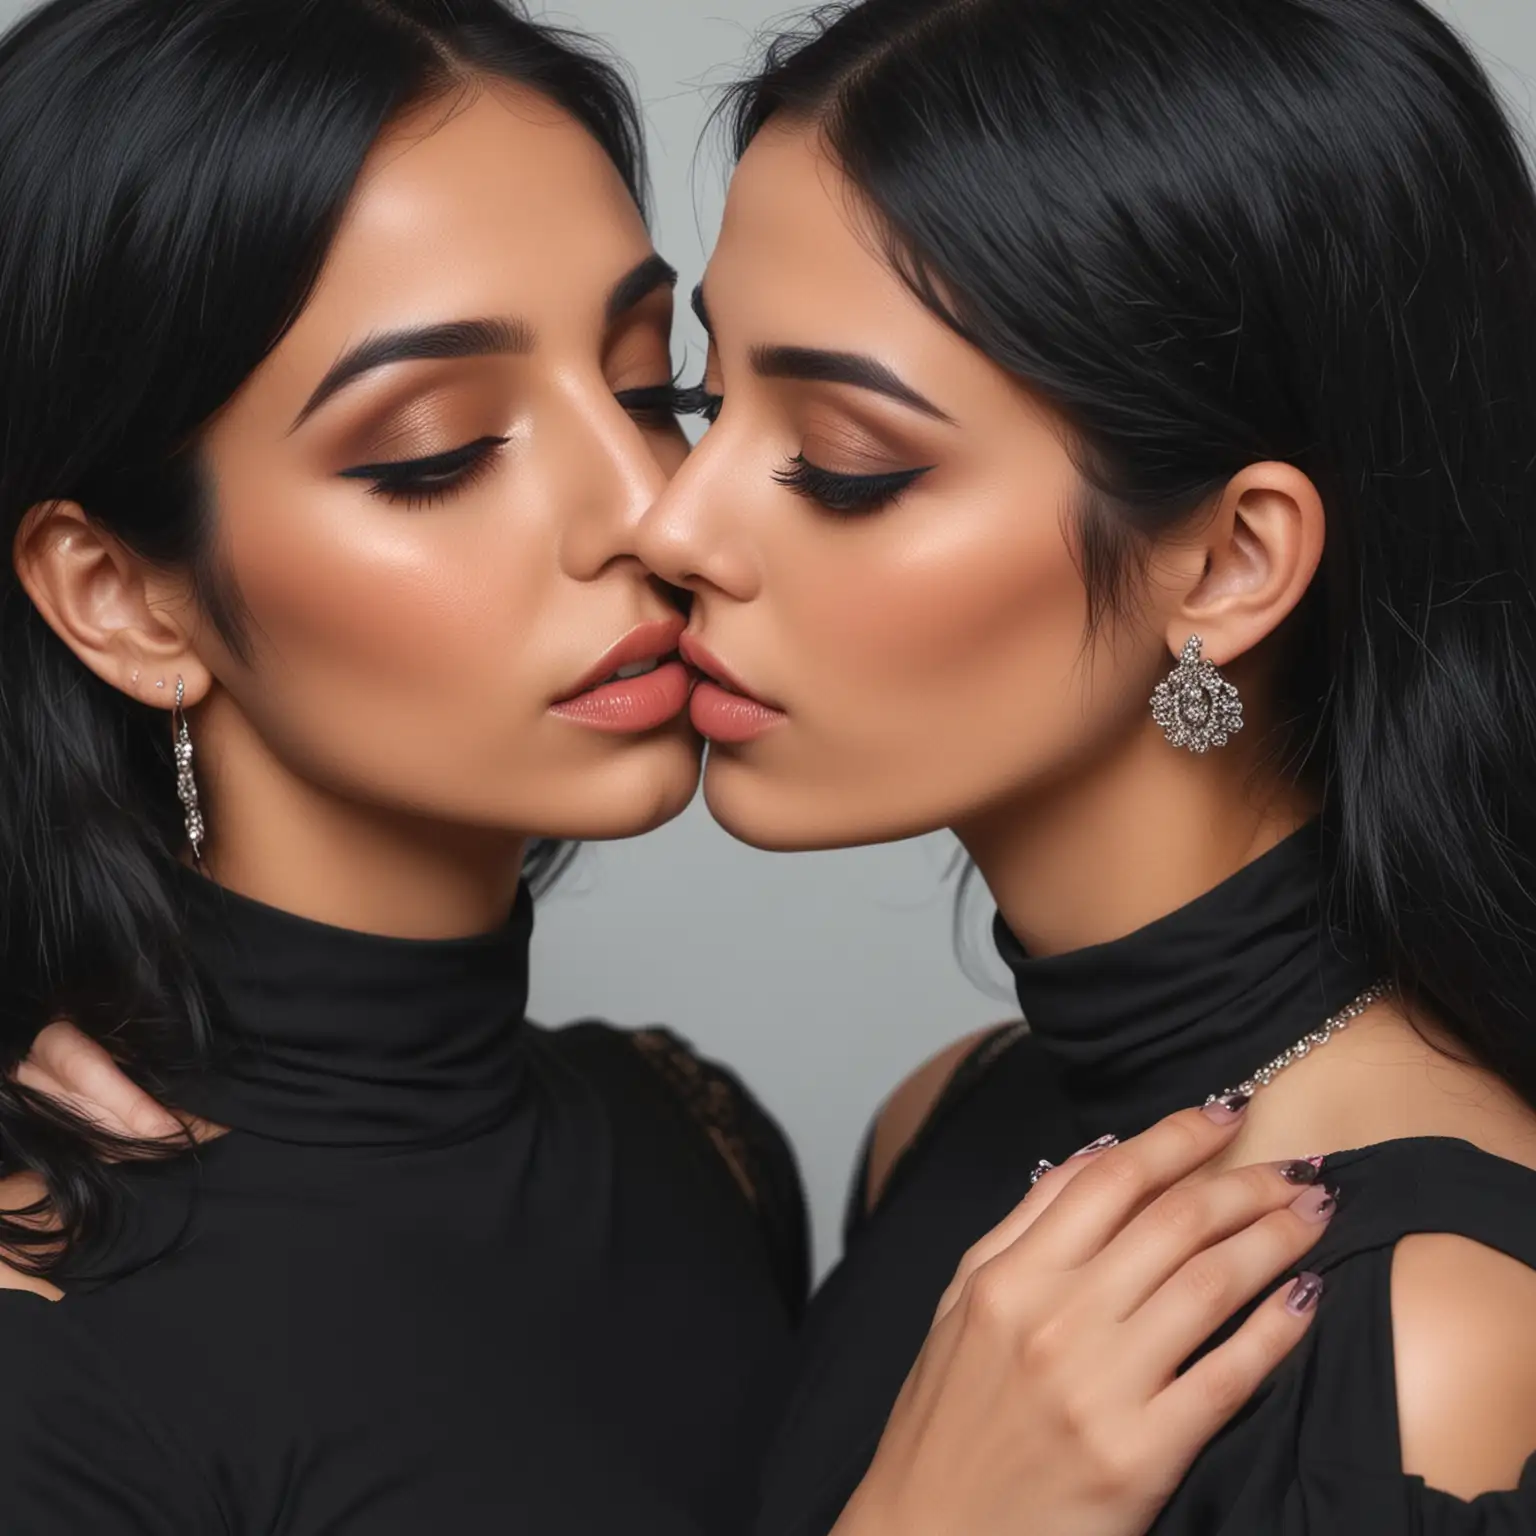 Iranian two Hot girl , best makeup, wearing black dress,black hairs, (neck and shoulder kissing),ultra realistic,portrait picture in 4k resolution